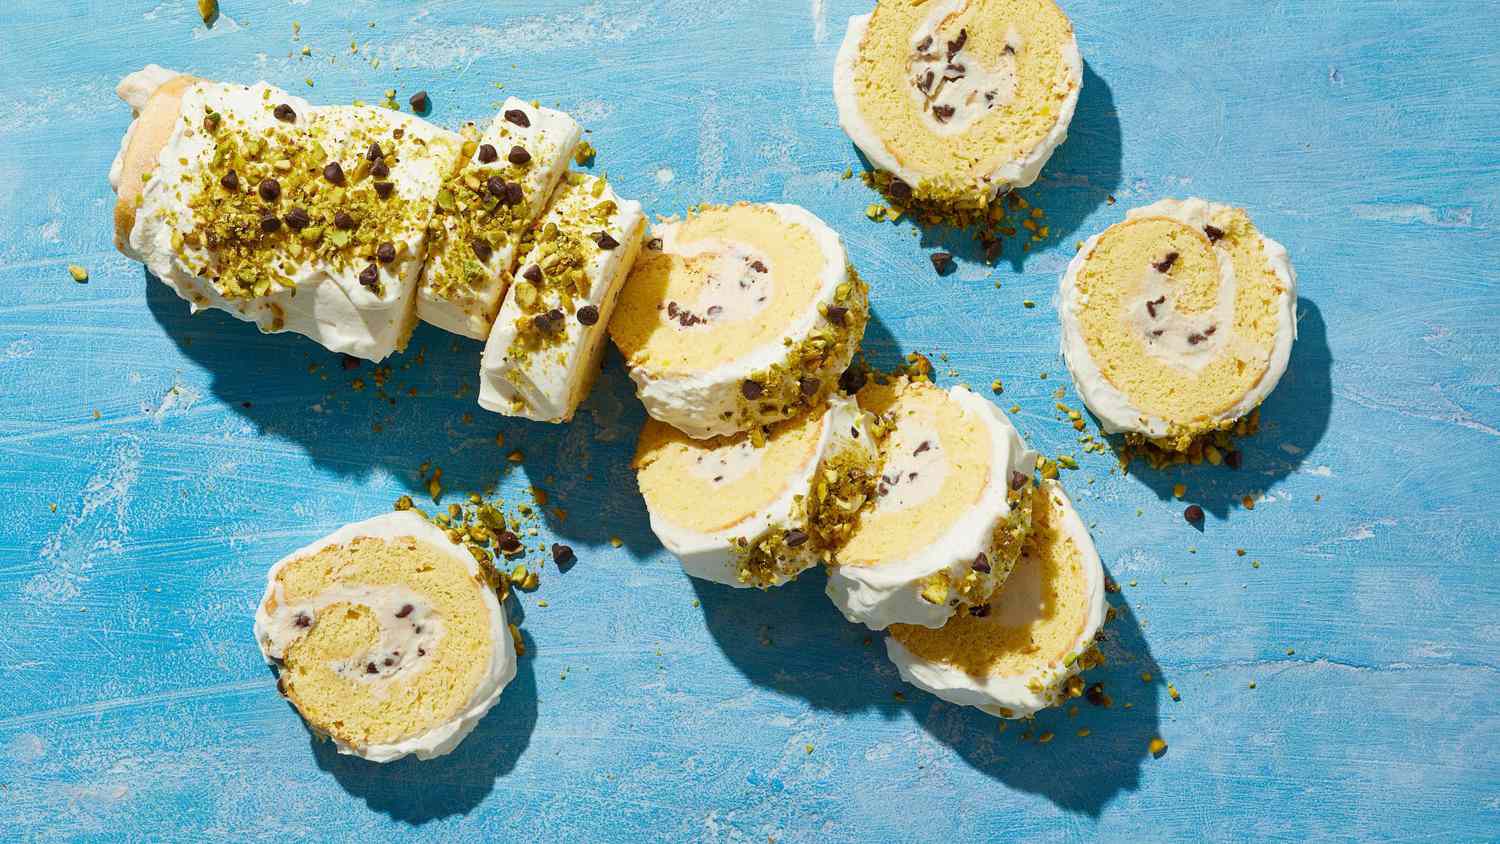 Slices of a cream-filled jelly roll cake topped with pistachios and chocolate chips on a blue surface